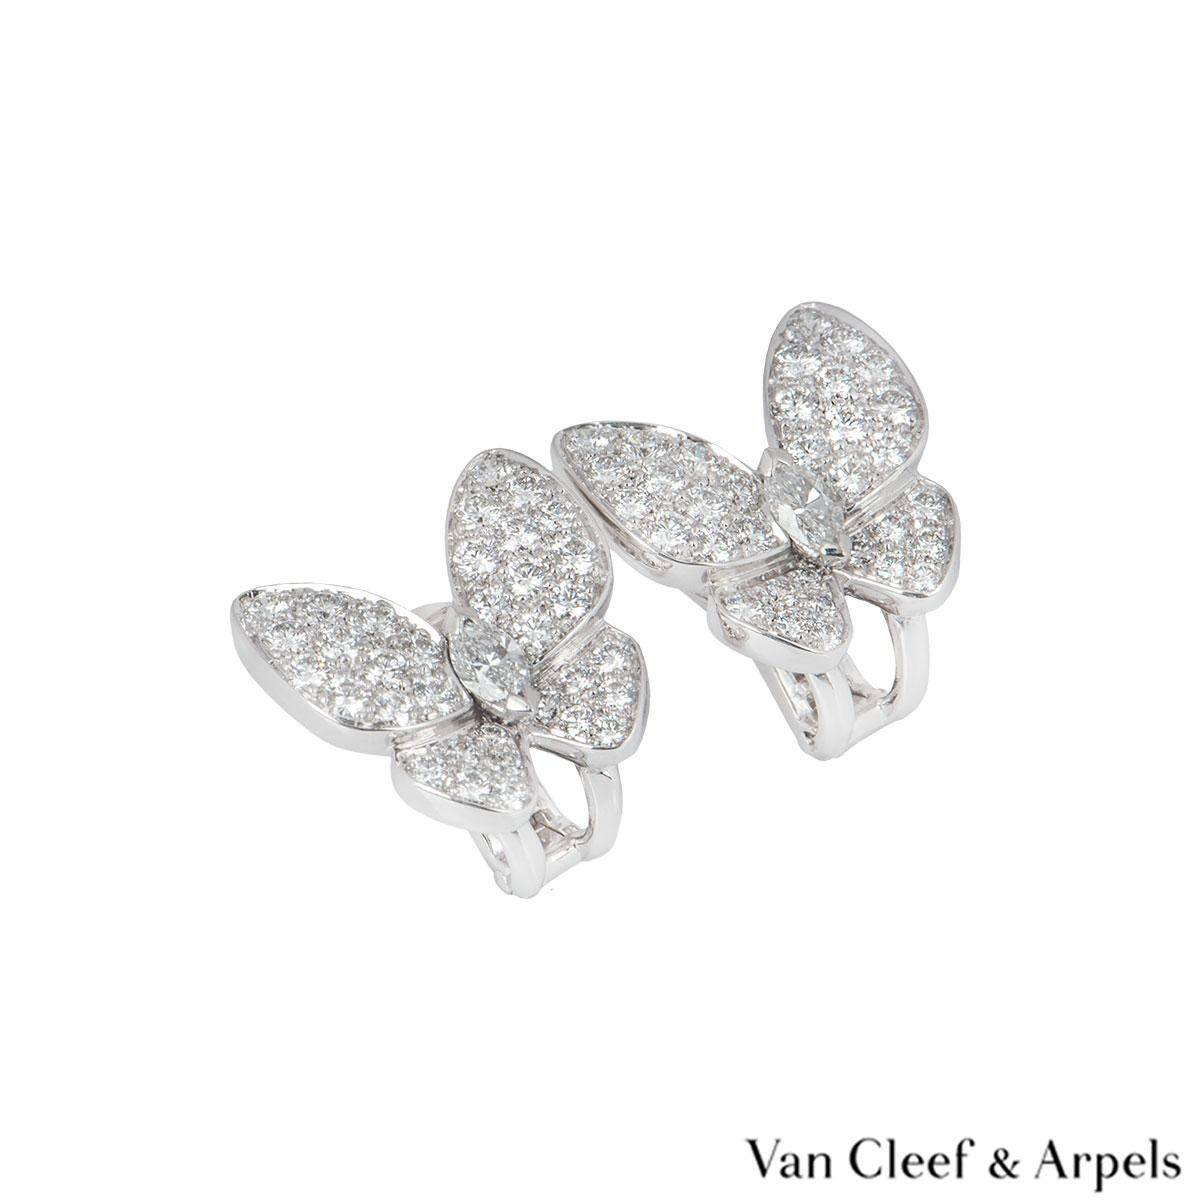 A pair of 18k white gold and diamond butterfly earrings by Van cleef & Arpels from the Fauna collection. The earrings feature a butterfly design pave set with round brilliant cut diamonds on the wings and a marquise cut diamond in the centre. There